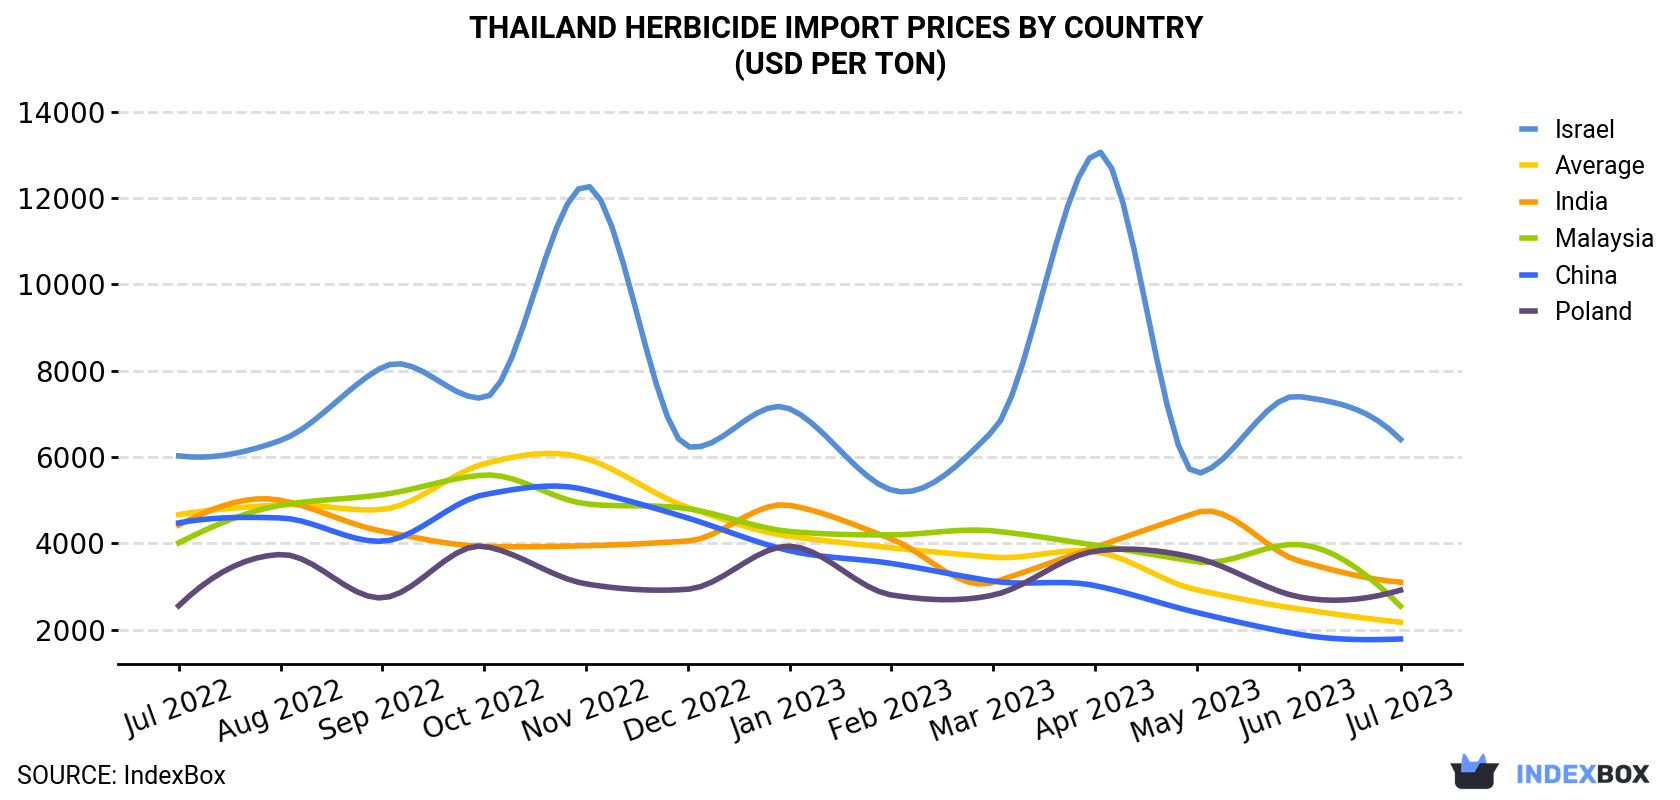 Thailand Herbicide Import Prices By Country (USD Per Ton)